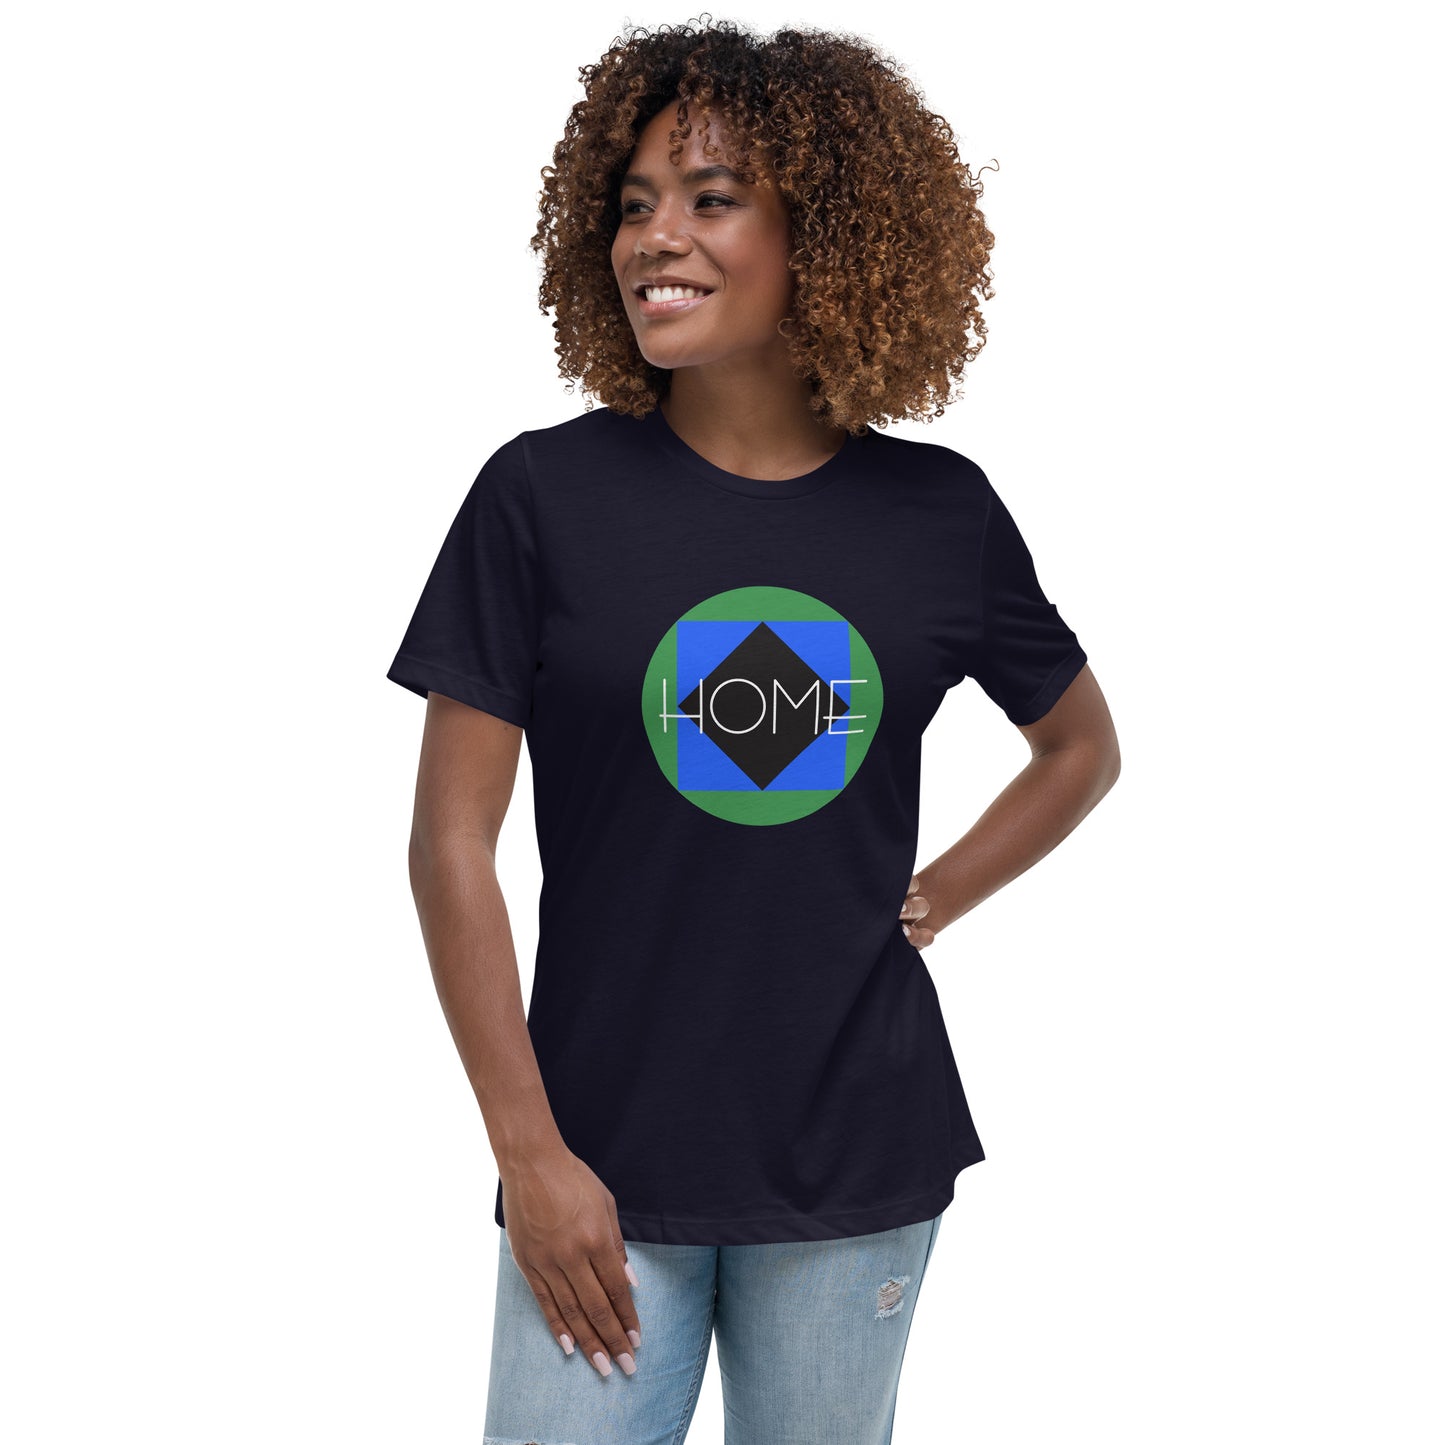 CS0023 - 02001 - Trail Icons Home Women's Relaxed T-Shirt